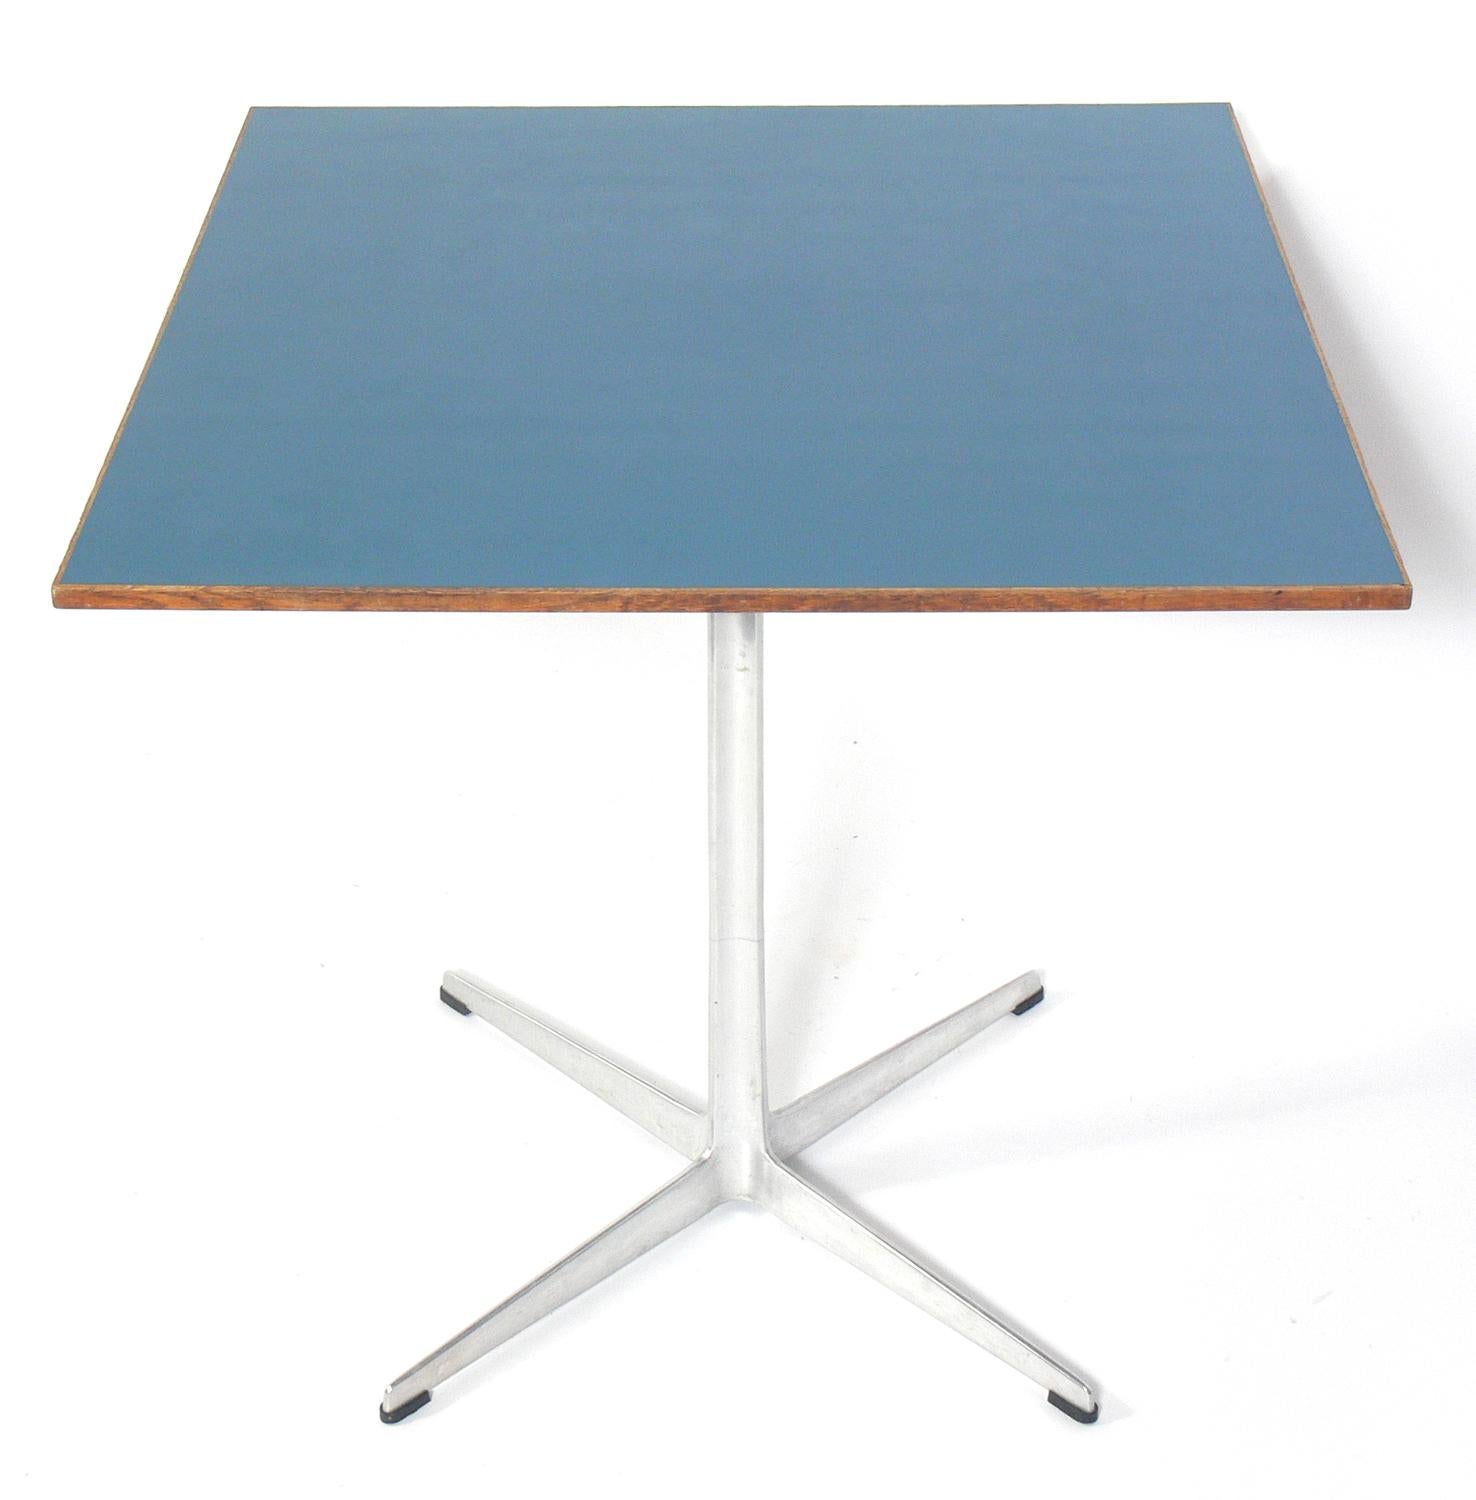 Danish Modern dining or breakfast table, designed by Arne Jacobsen for Fritz Hansen, circa 1960s. Signed with 